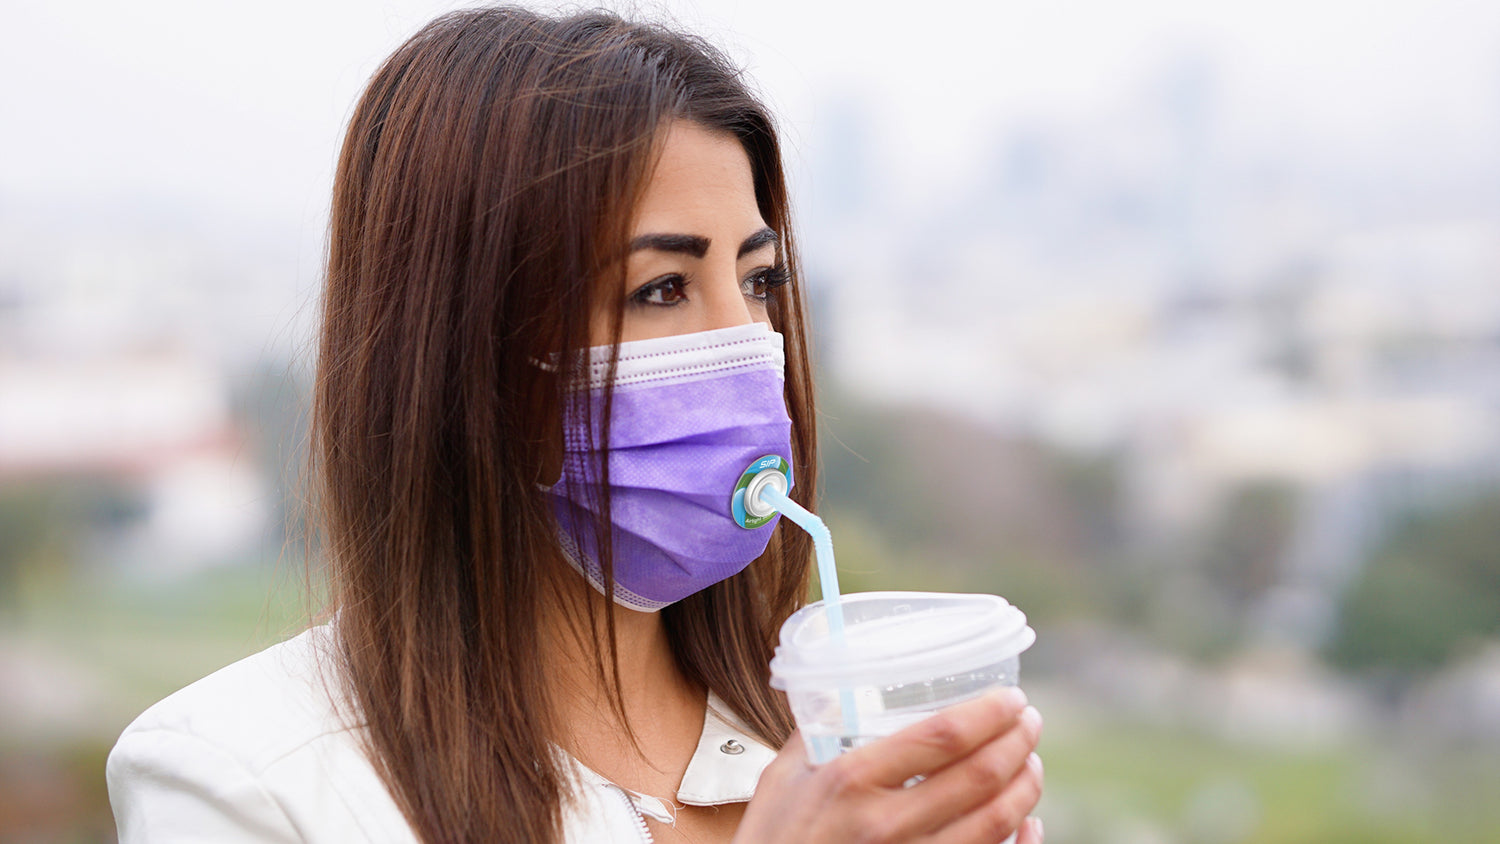 SIP Airtight Drinking Valve:  Safely drink in public spaces without removing your mask or compromising your health.  SIP is an airtight drinking valve that automatically seals after each sip.  SIP can be installed on any mask and custom fit to your mouth.